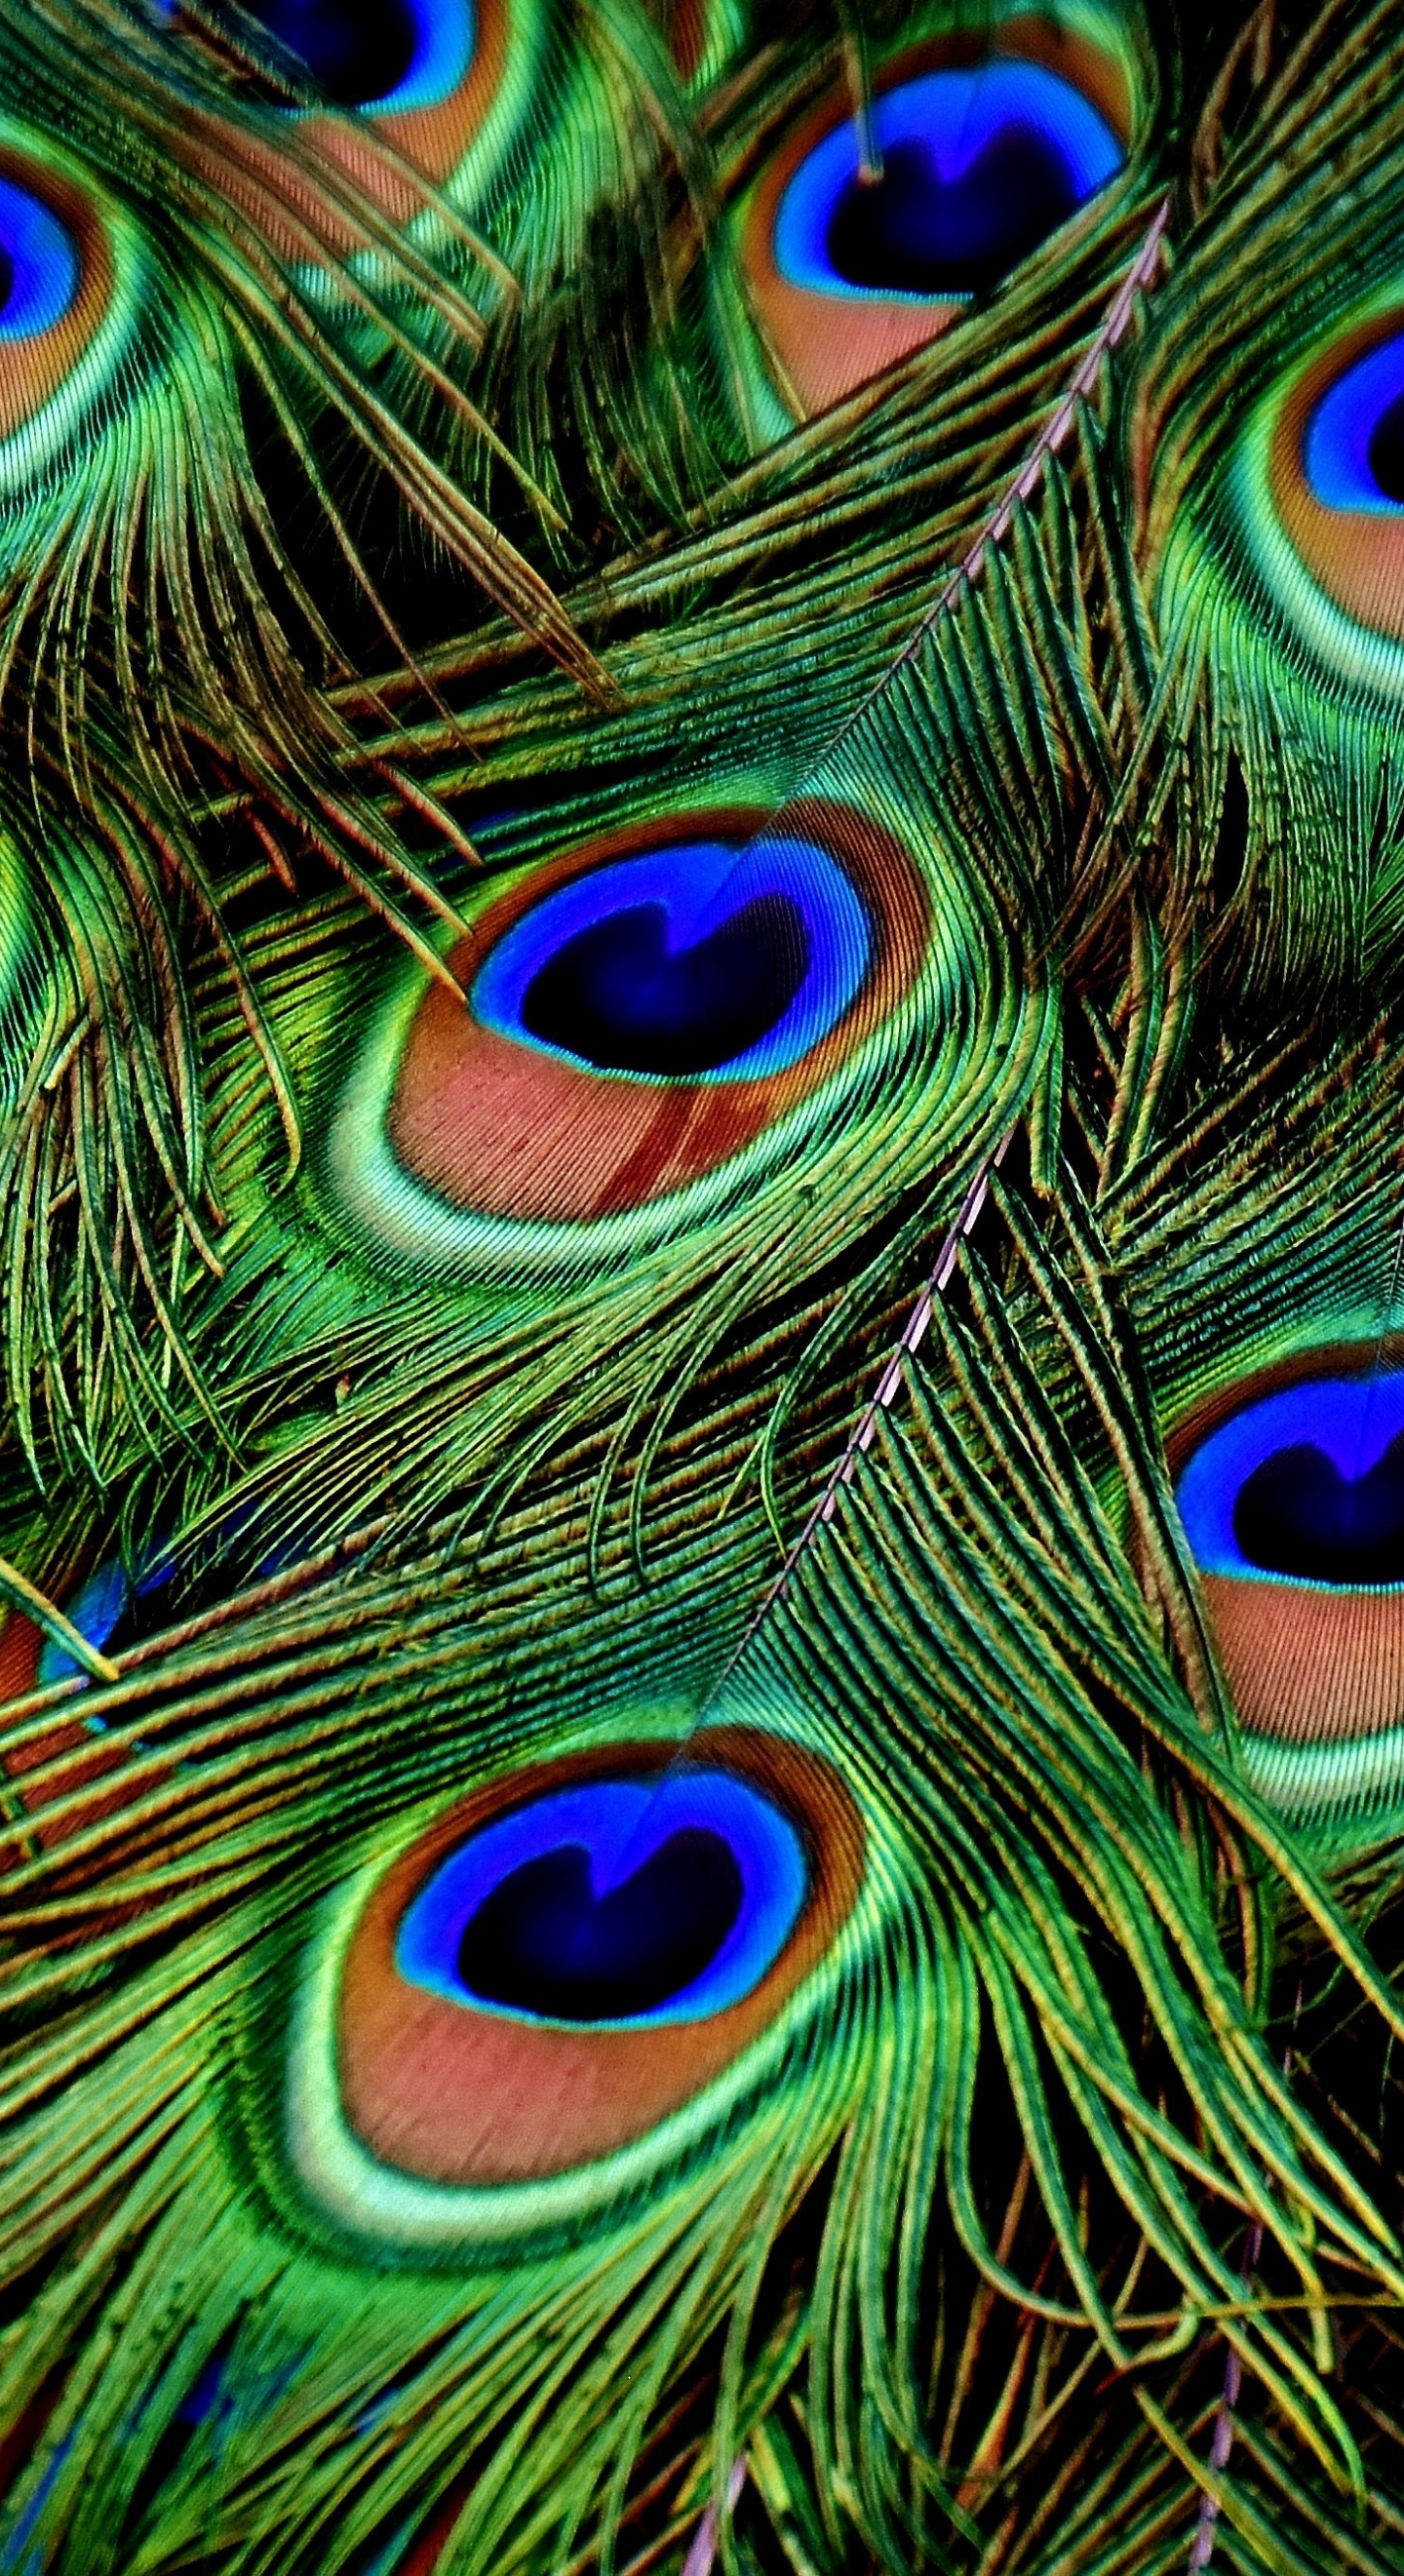 1440x2642 Download peacock, feathers, colorful, plumage 1440x2960 wallpaper, samsung galaxy s8, samsung galaxy s8 plus, 1440x2960 hd image, background, 1541